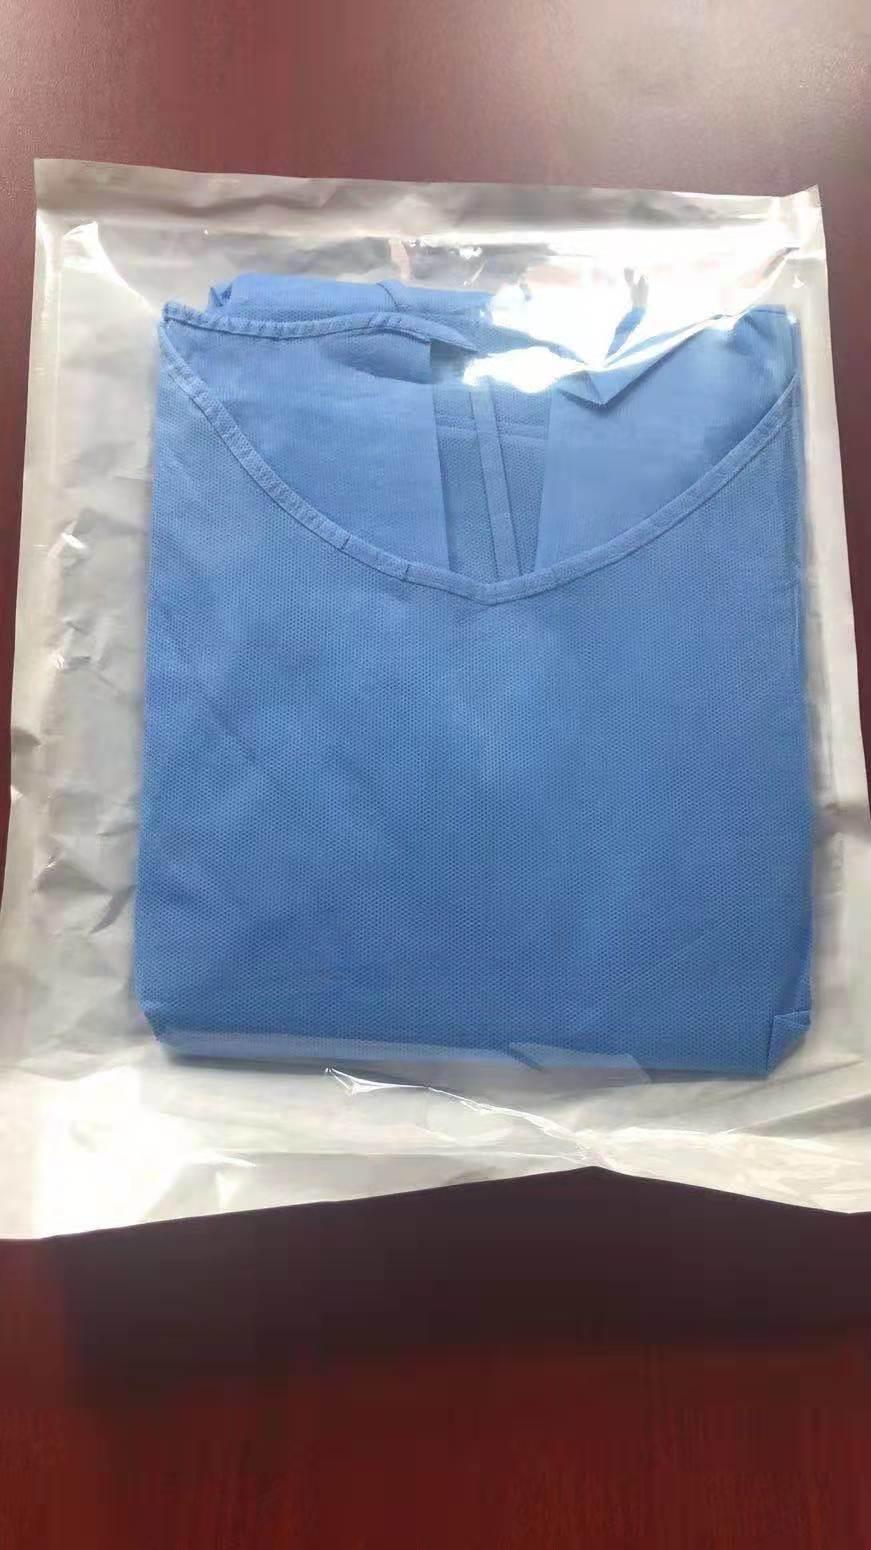 Sterile Disposable Operation Theatre Surgeon Barrier Gown